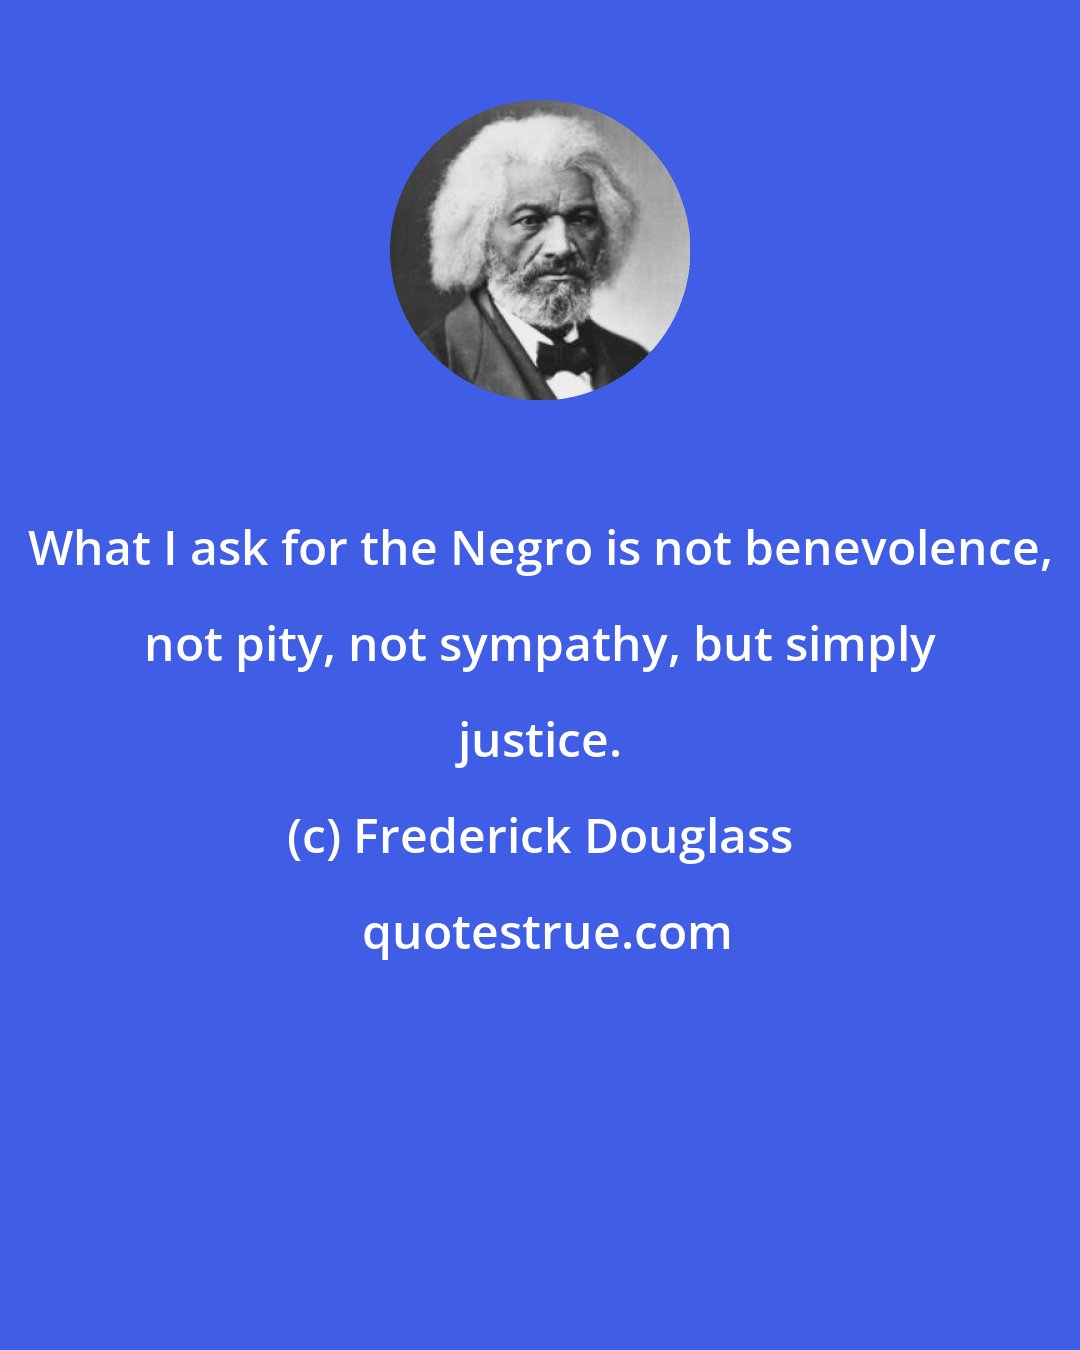 Frederick Douglass: What I ask for the Negro is not benevolence, not pity, not sympathy, but simply justice.